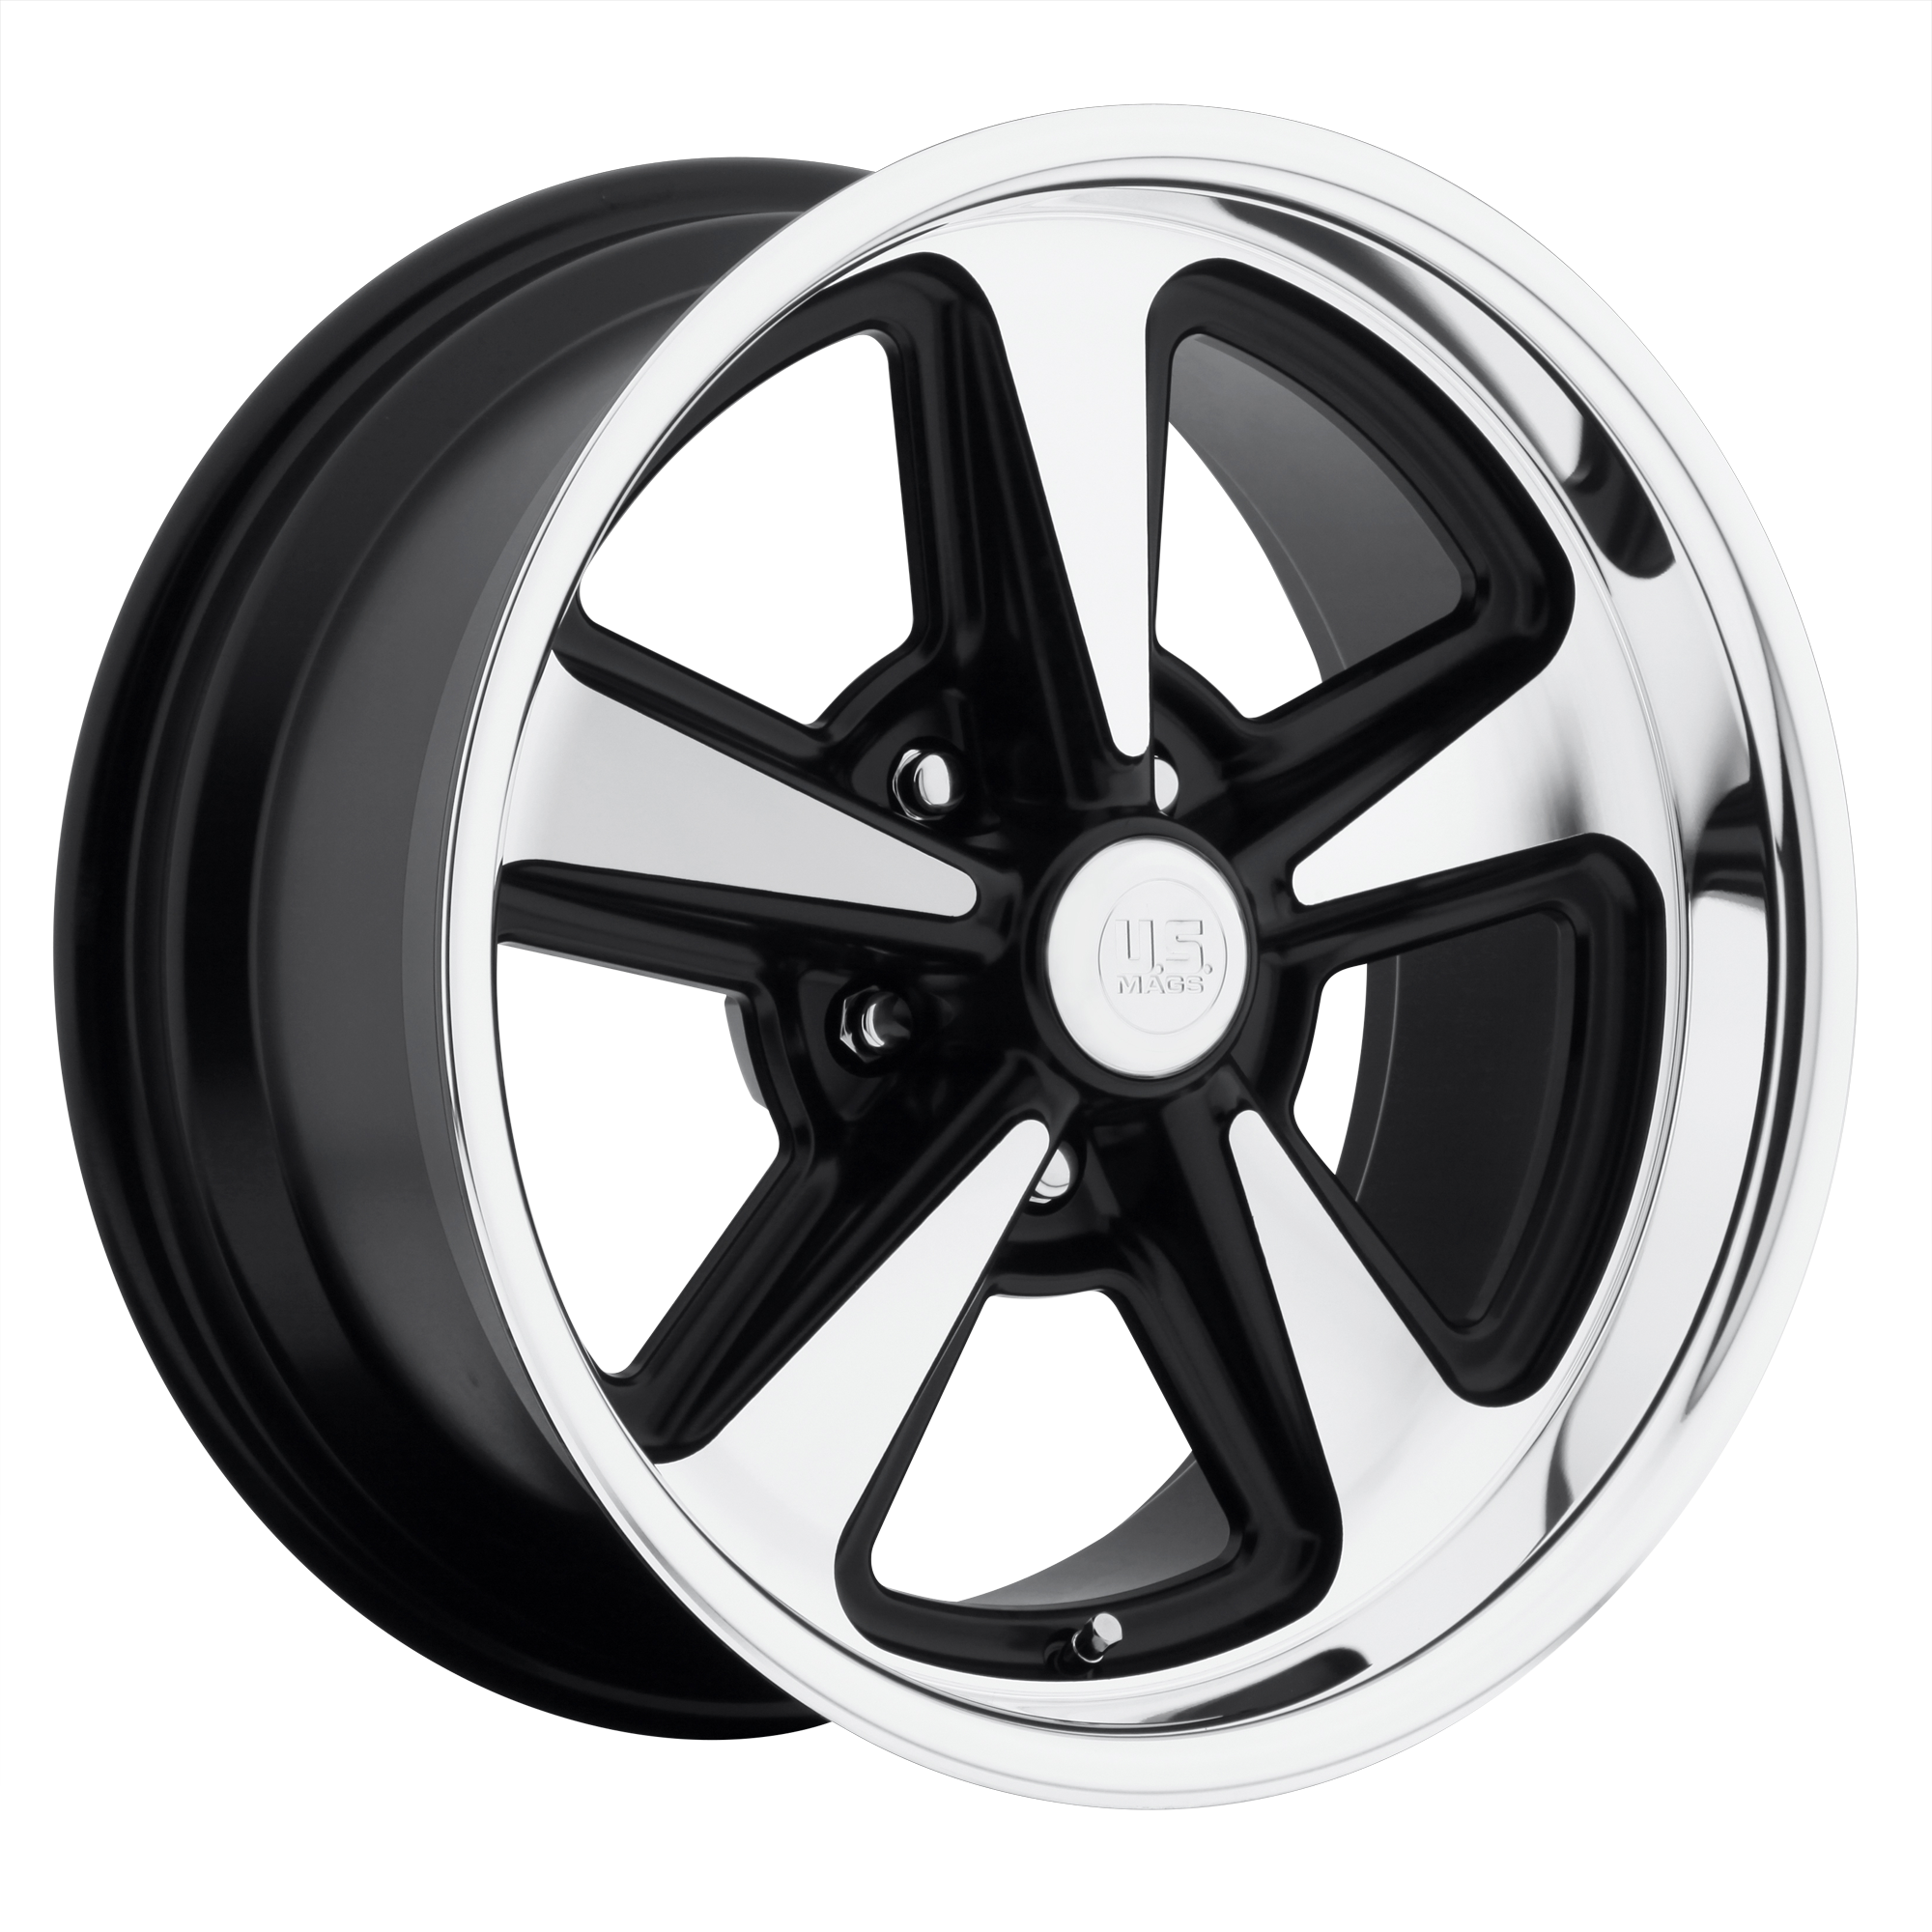 BANDIT 17x8 5x114.30 MATTE BLACK MACHINED (1 mm) - Tires and Engine Performance